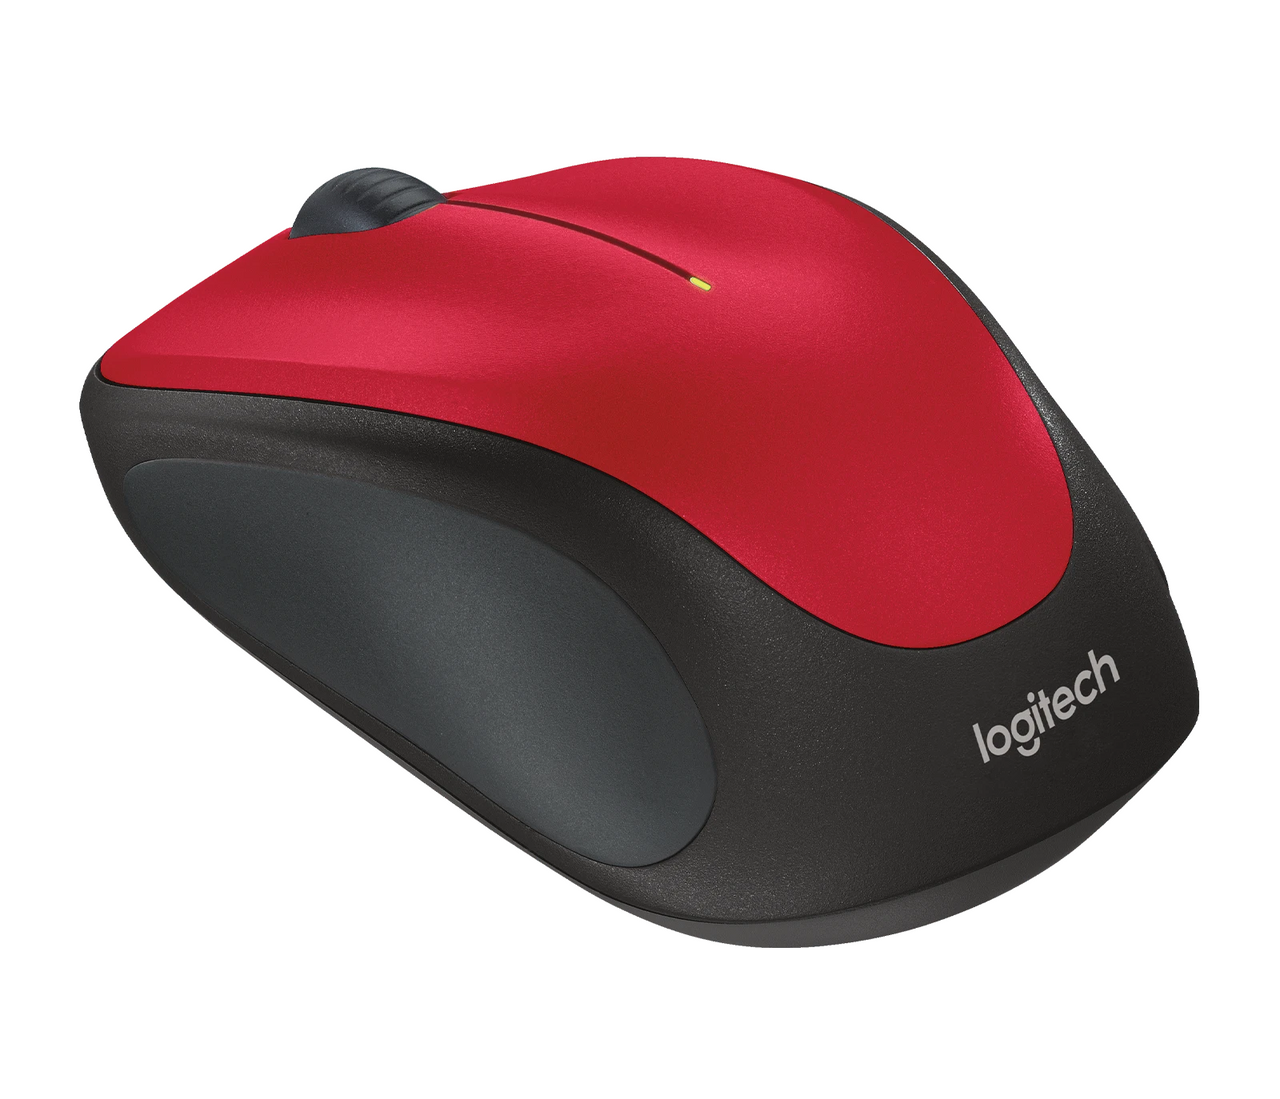 logitech-products-ayoub-computers